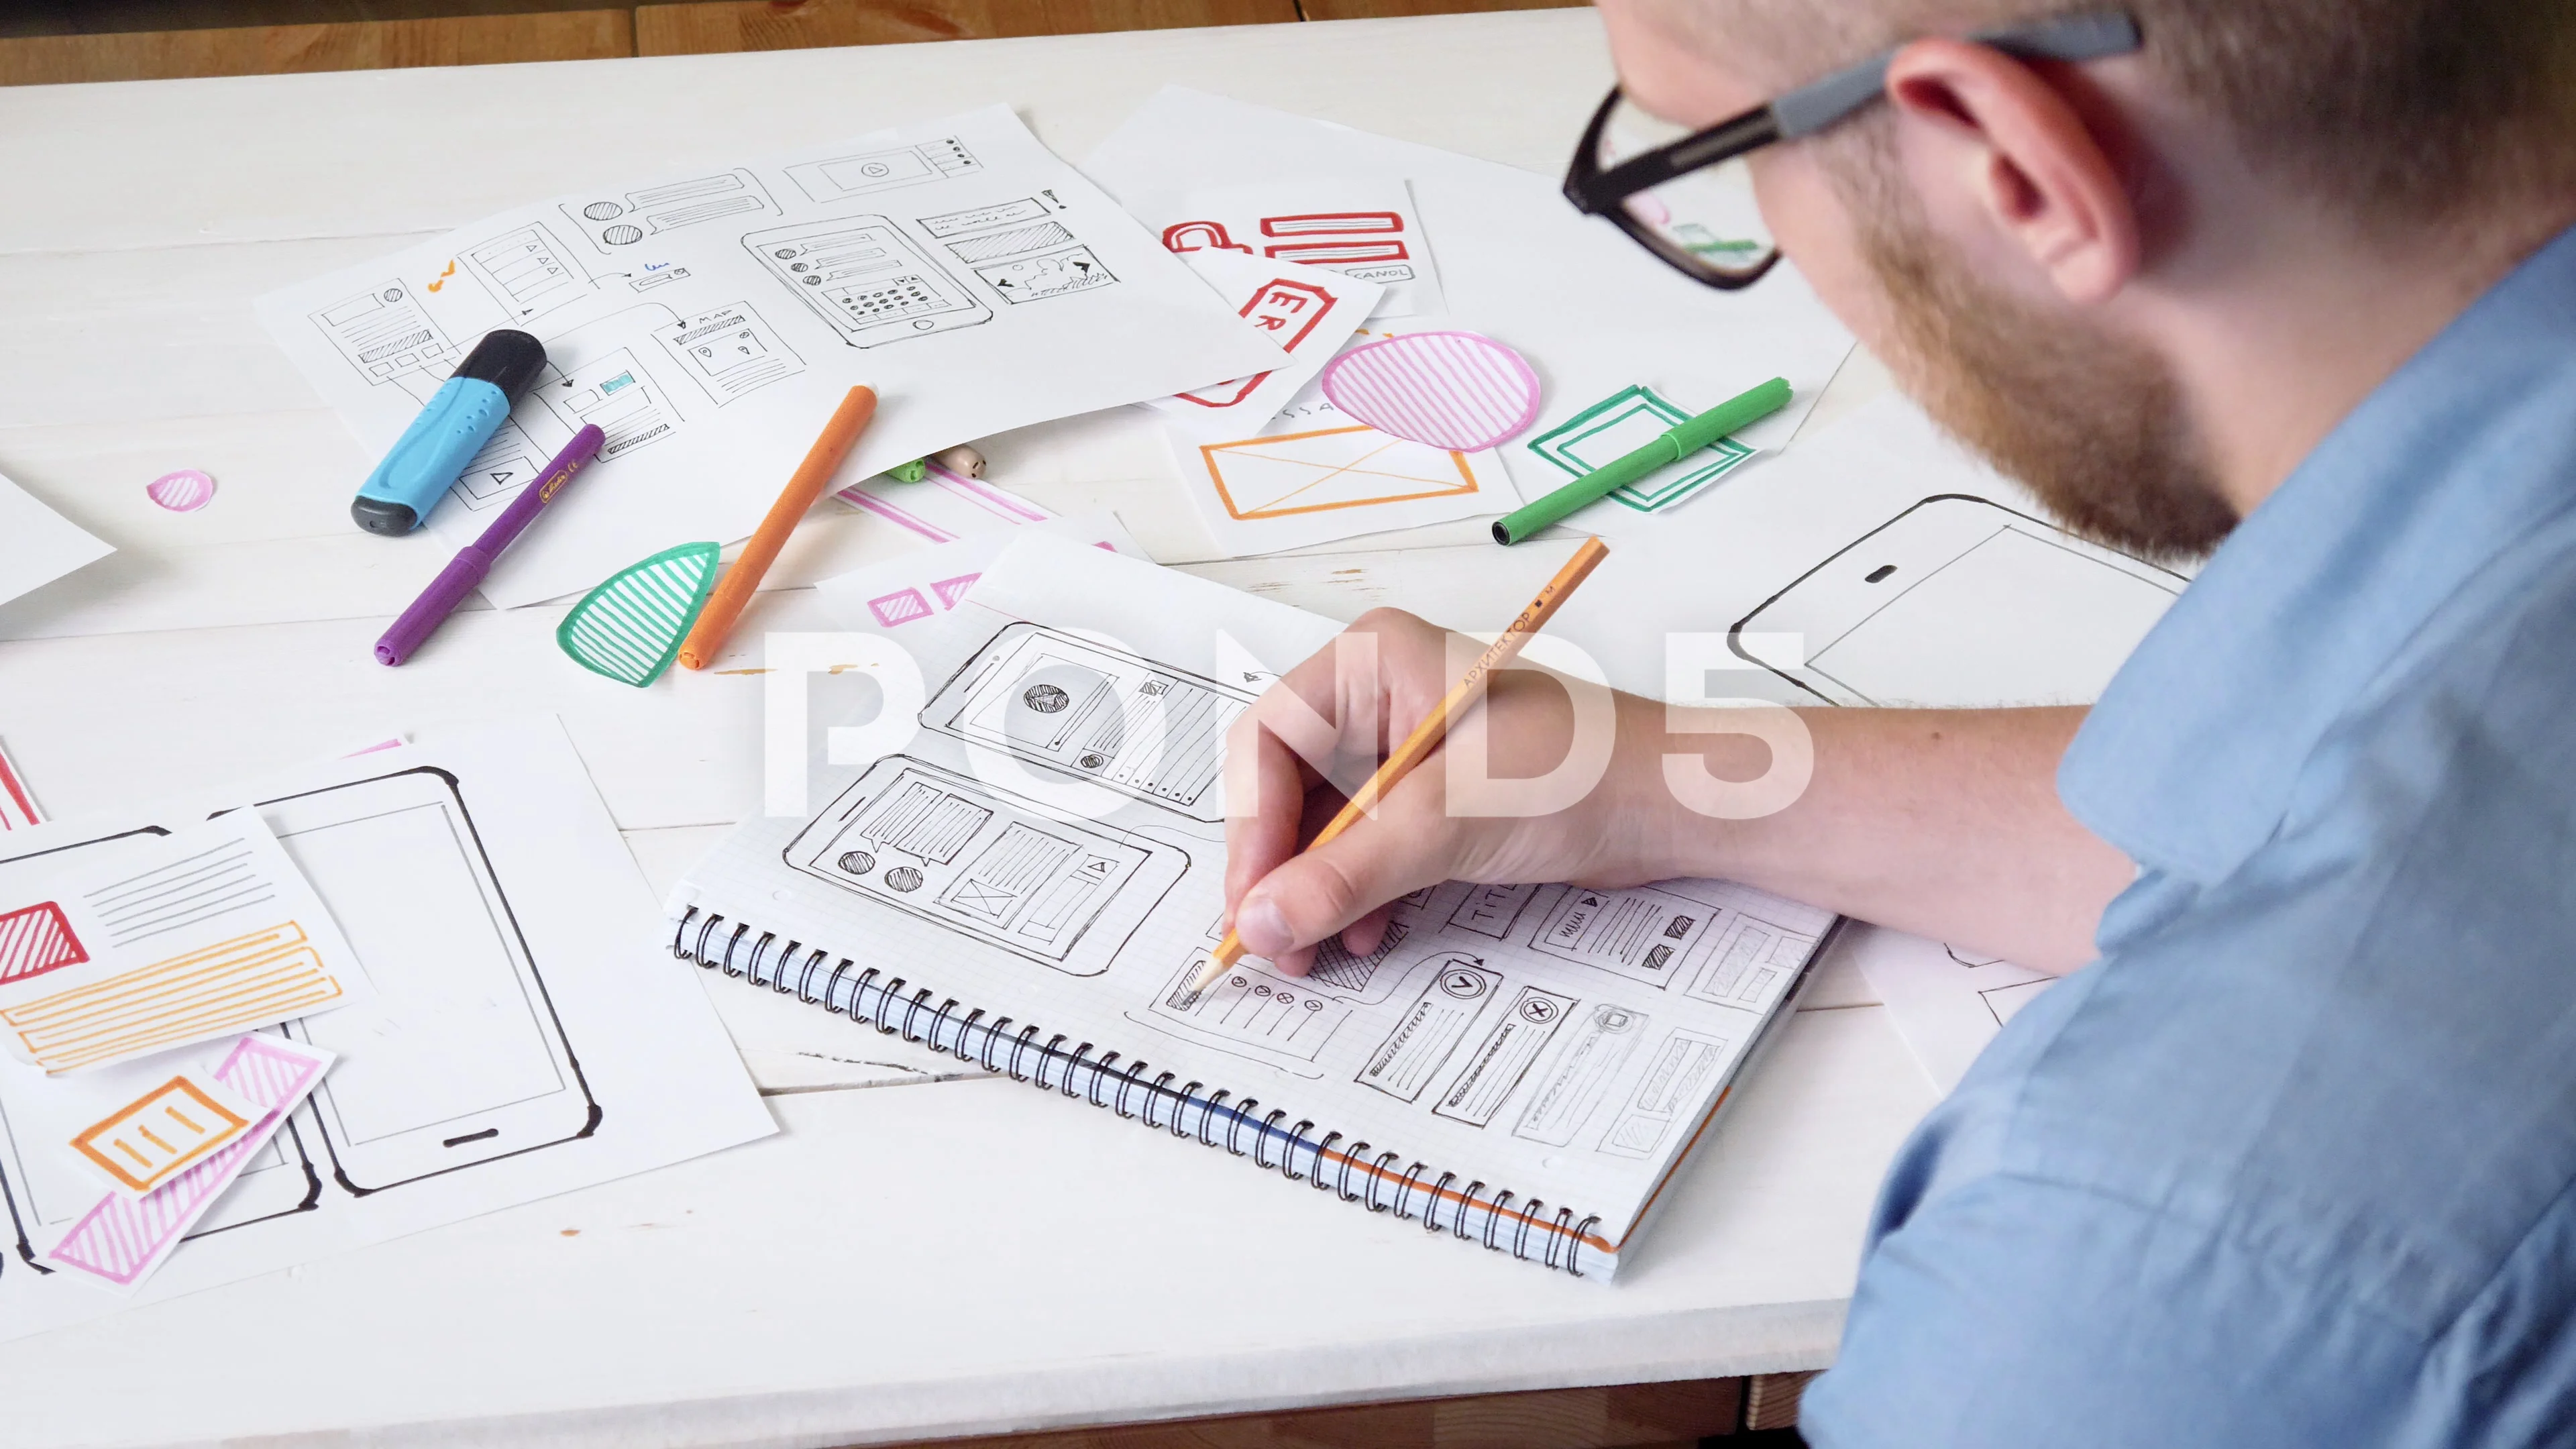 The art of UX sketching and paper prototyping | by Quickmark | UX Planet